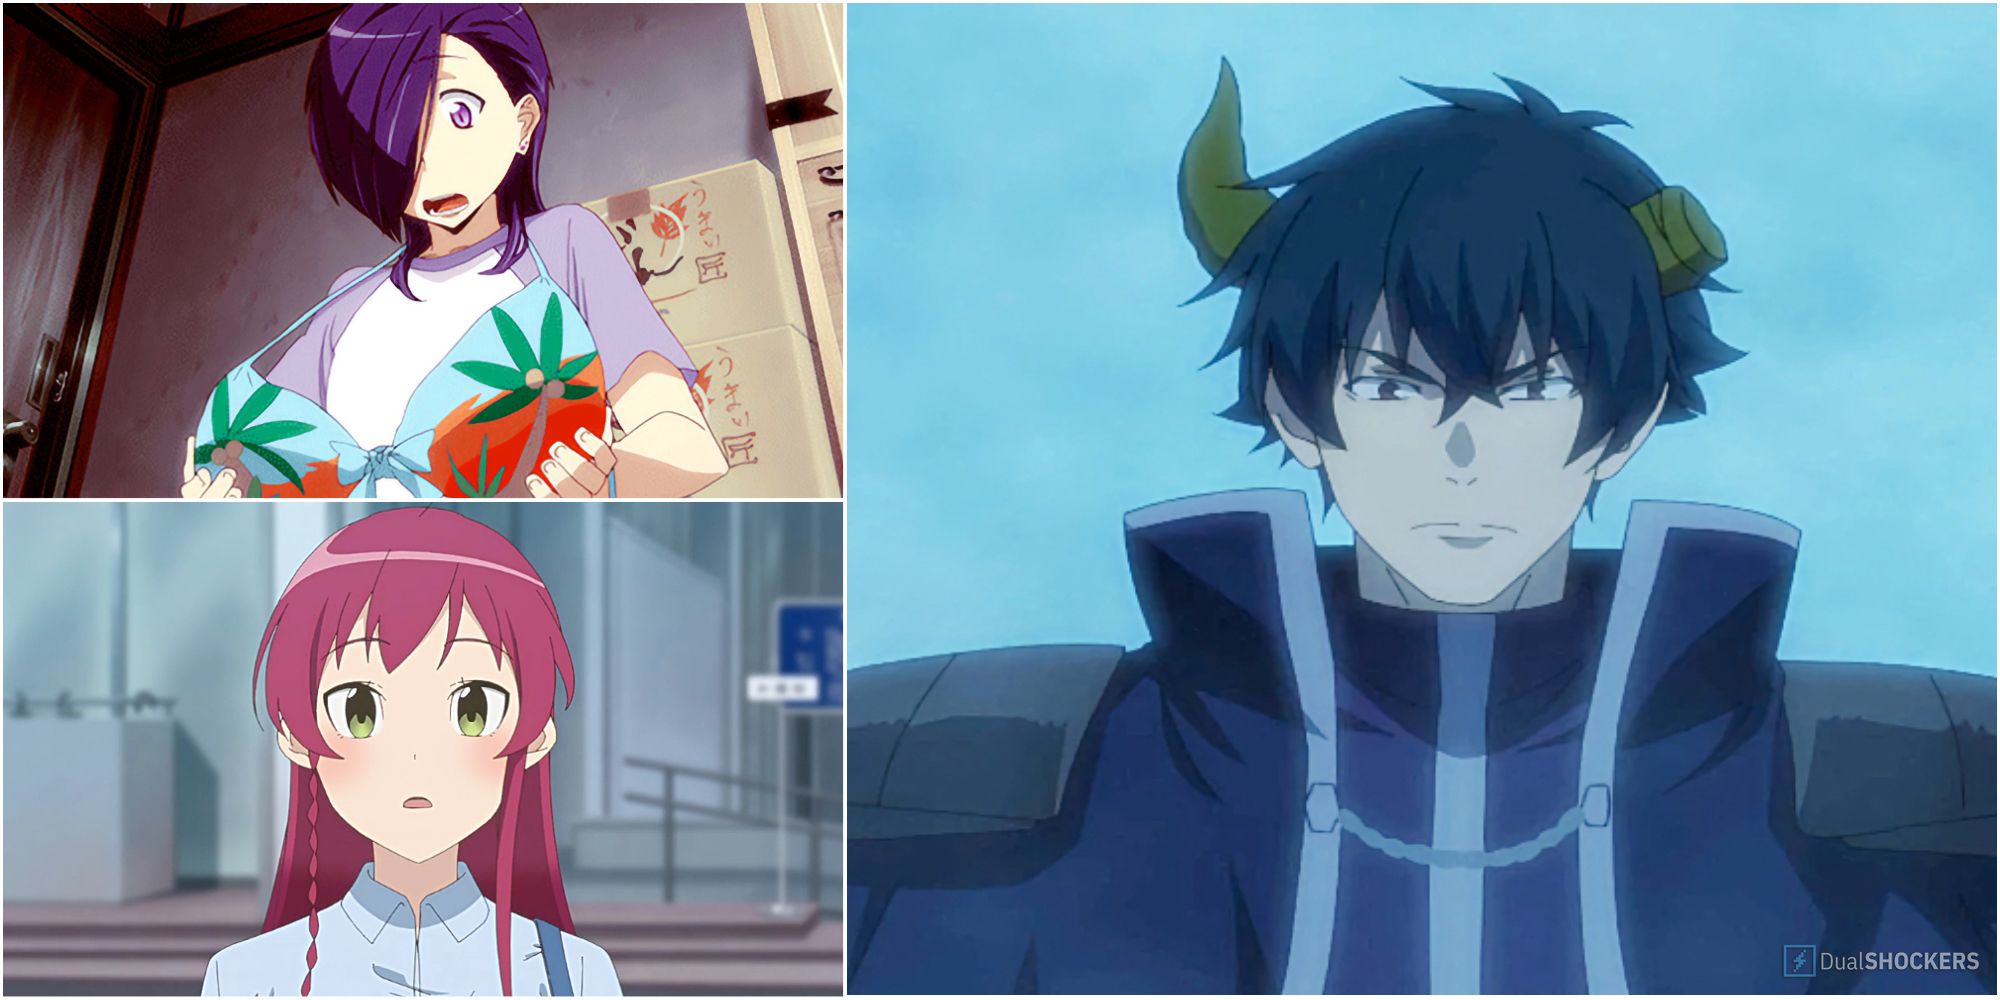 The Devil Is A Part-Timer!: 10 Best Characters, Ranked